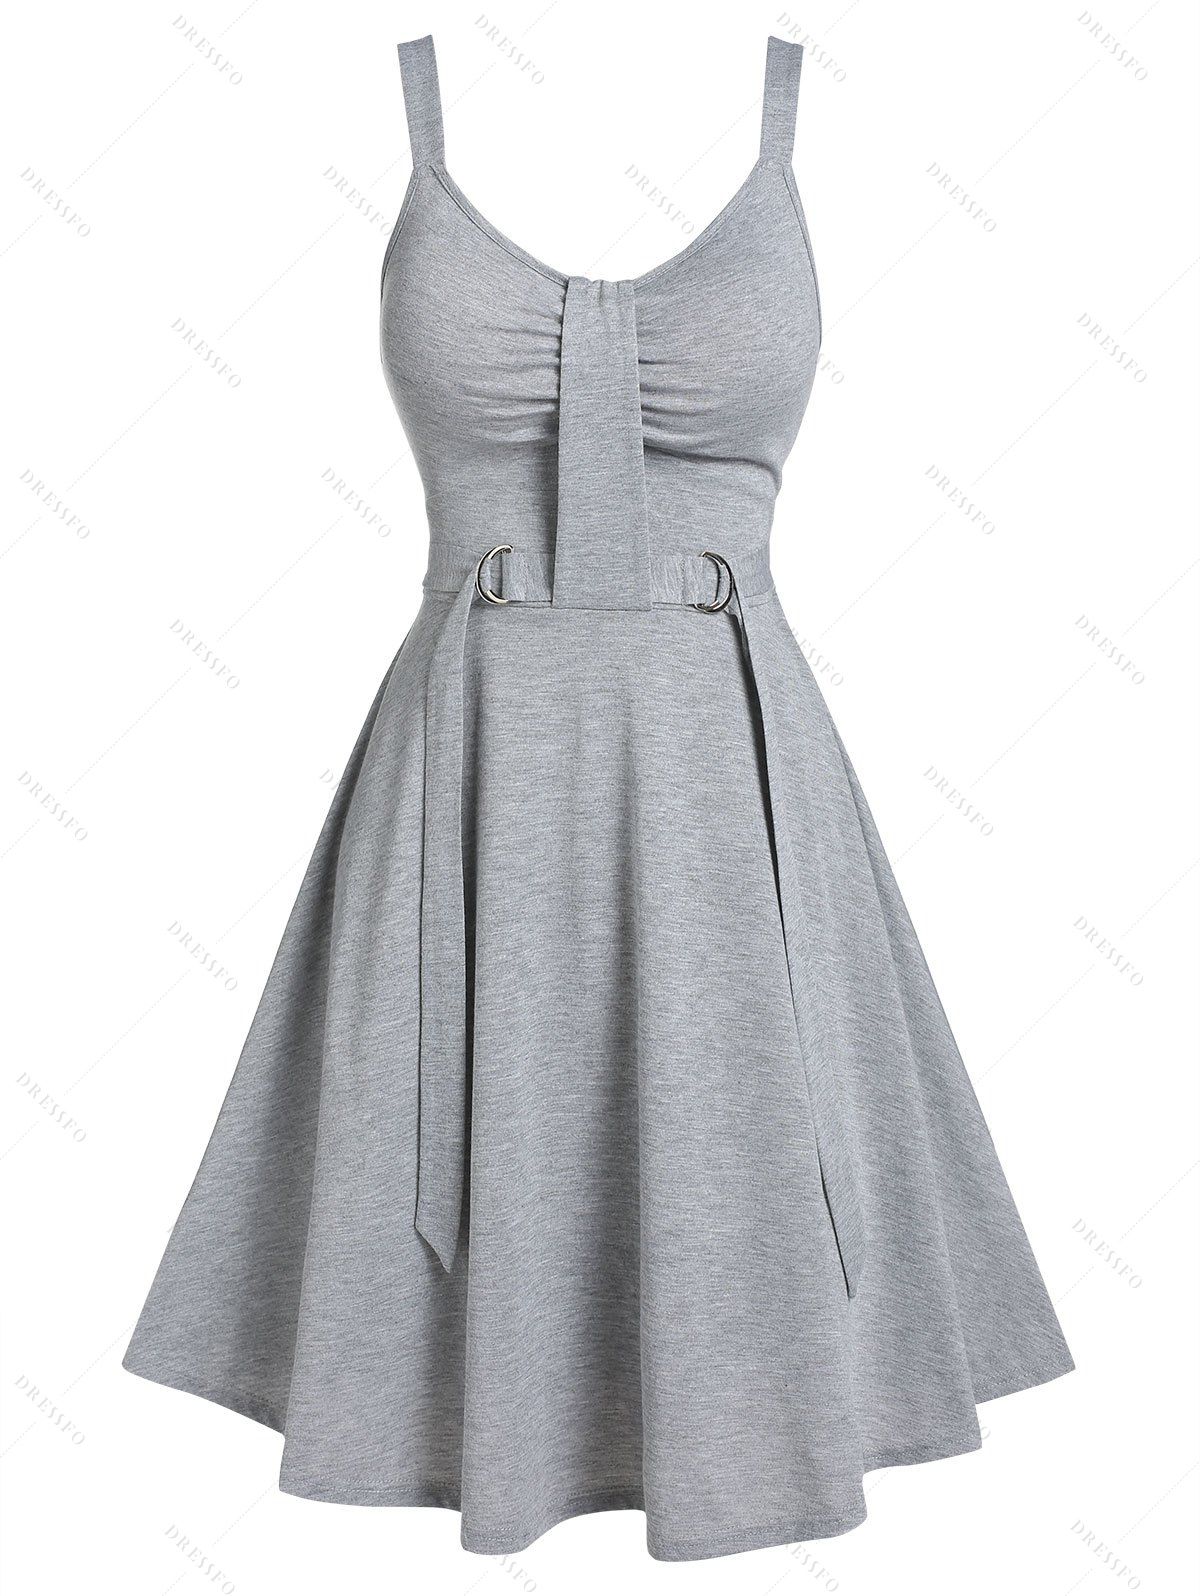 D Ring Backless Ruched A Line Dress - LIGHT GRAY M